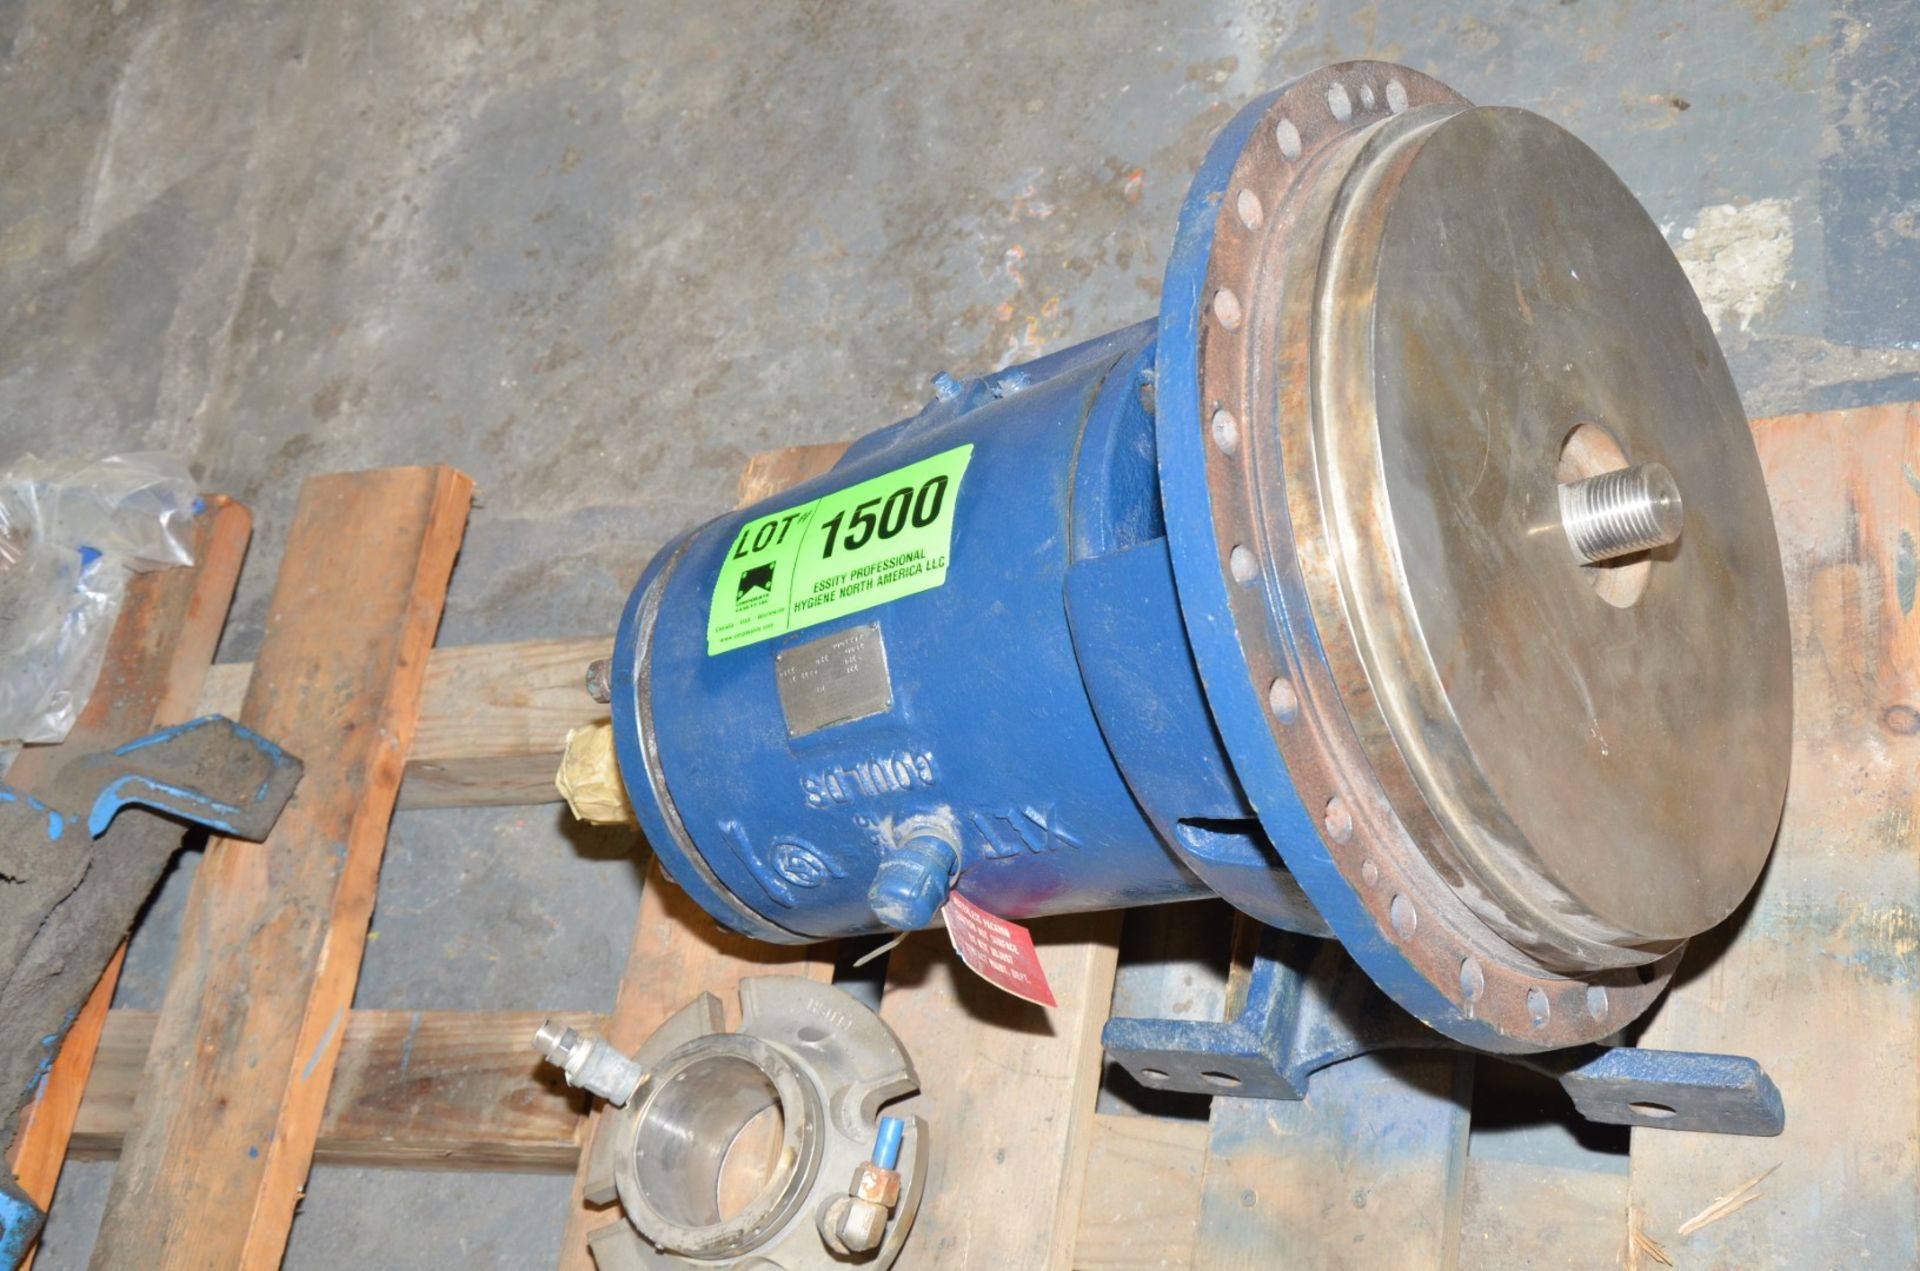 GOULDS 3195 6X12-13 PUMP ROTARY ASSY [RIGGING FEE FOR LOT #1500 - $25 USD PLUS APPLICABLE TAXES] - Image 2 of 3